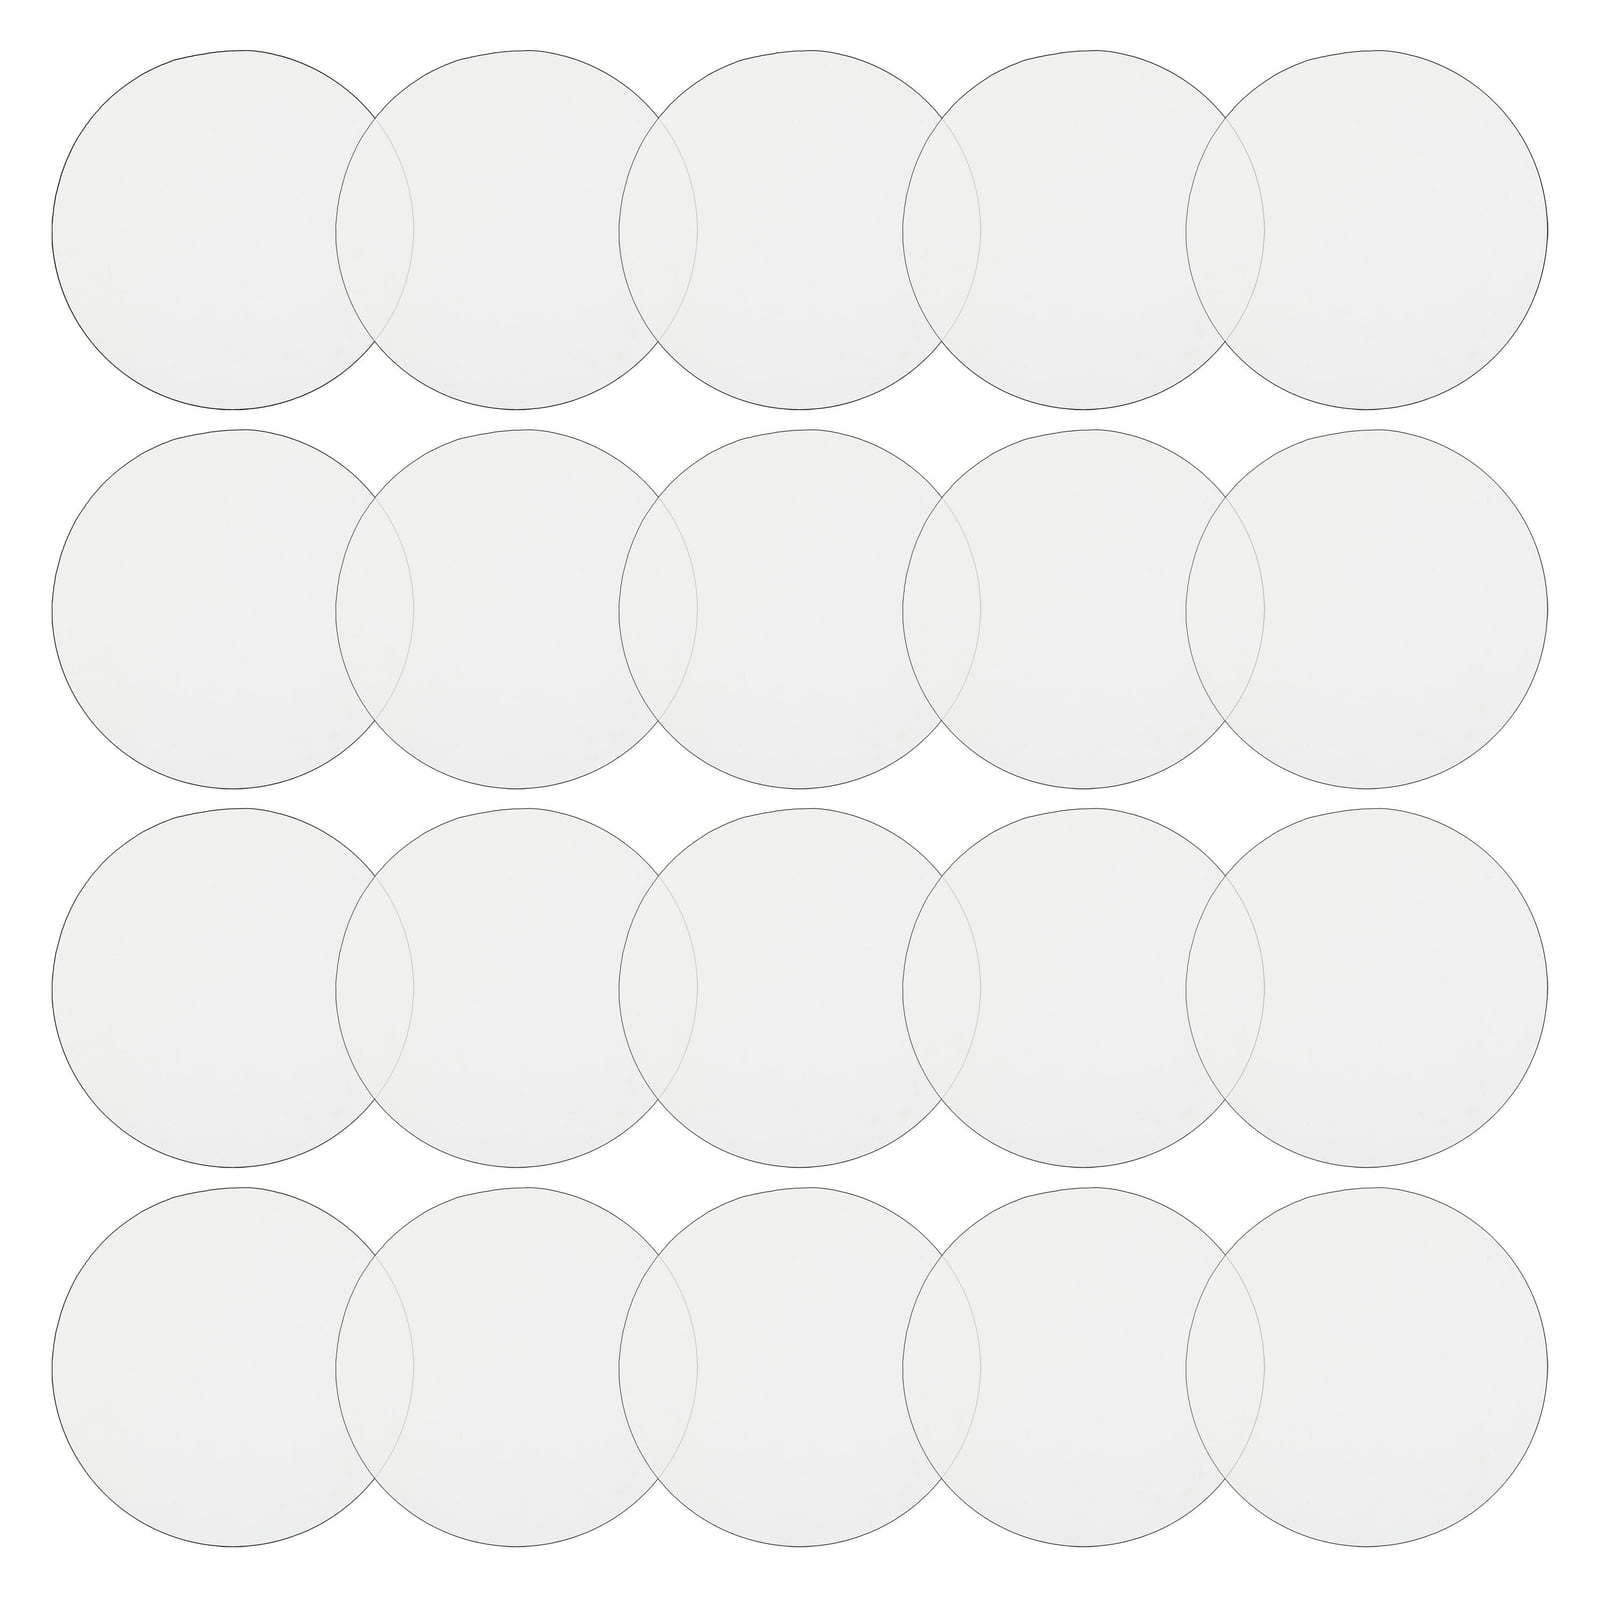 3mm Clear Acrylic Disks, Round Circles for Arts and Craft Supplies (2.25 In  Diameter, 20 Pack)